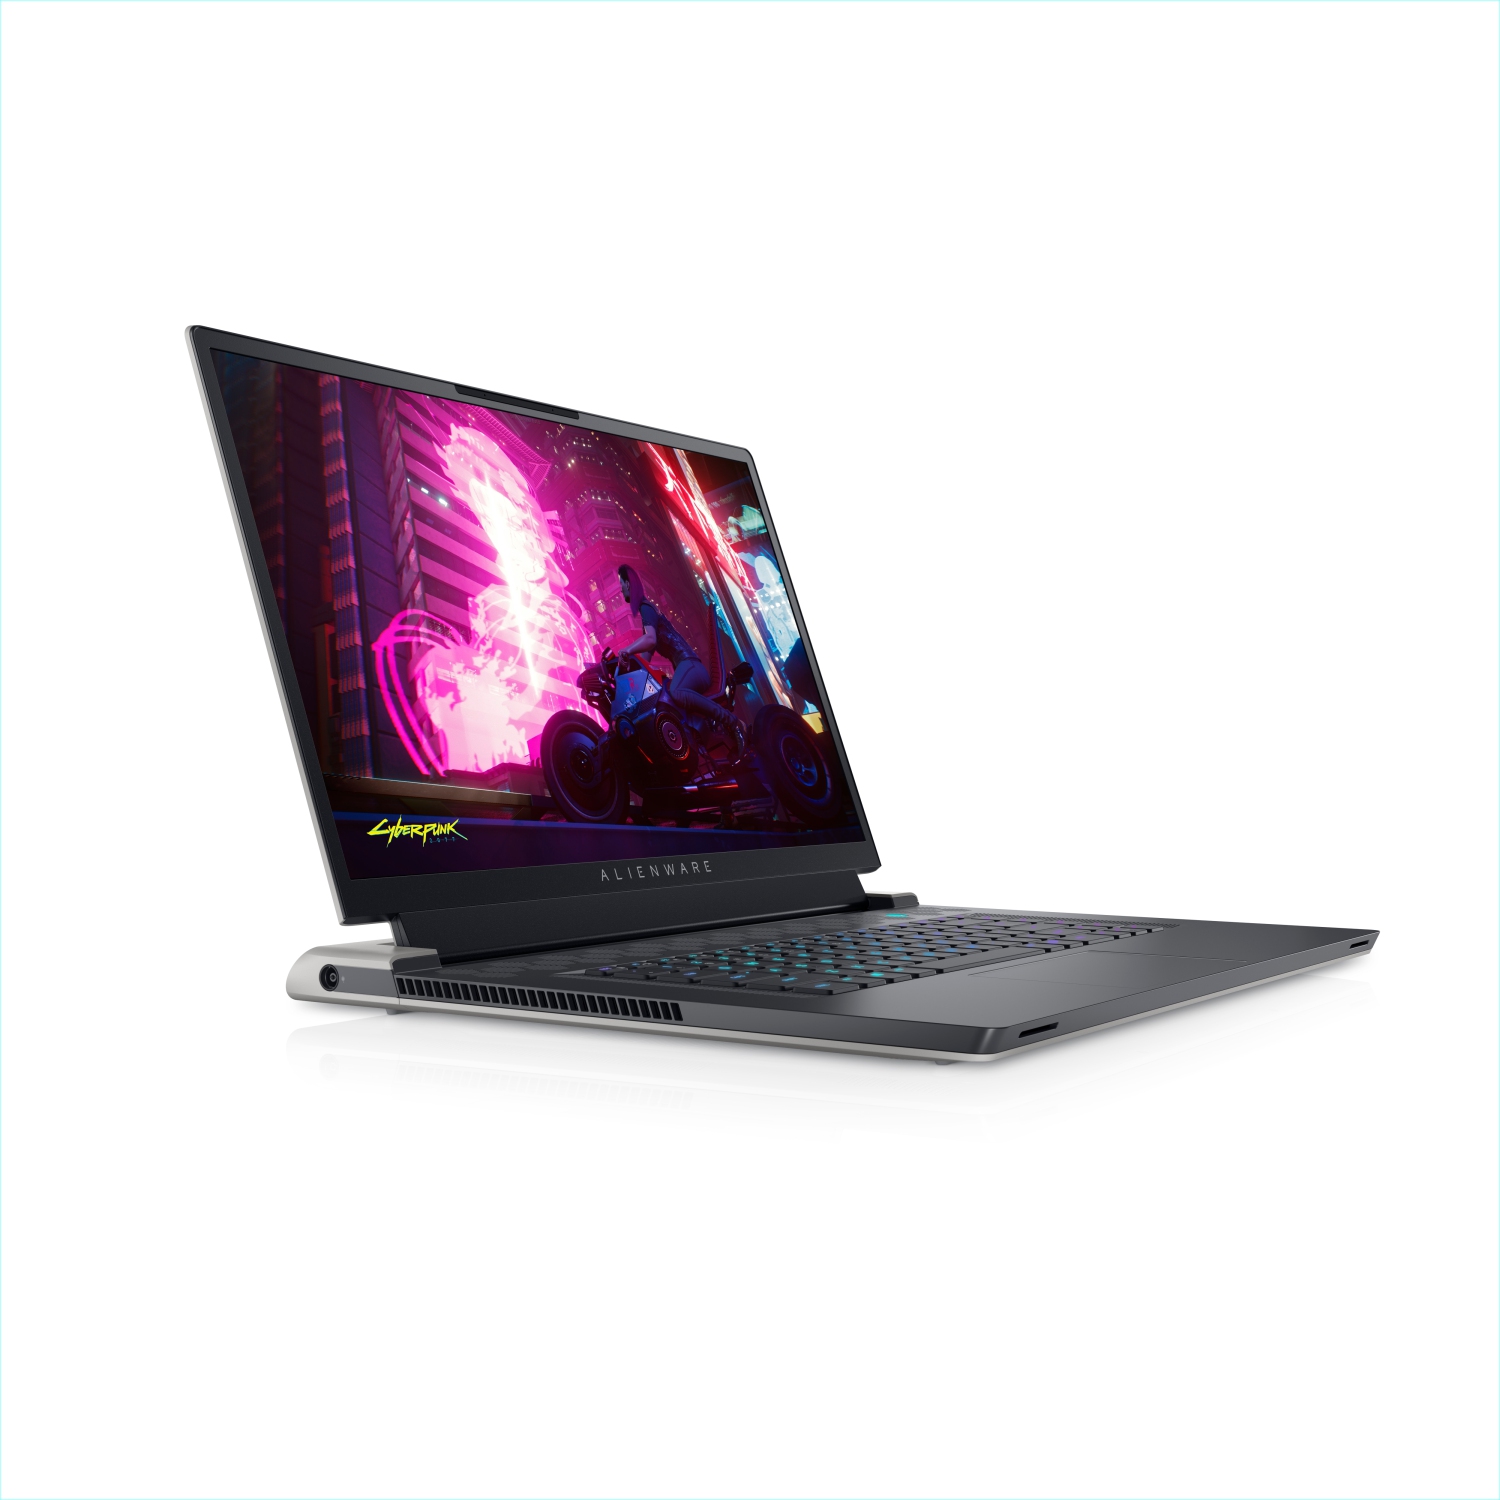 Refurbished (Excellent) - Dell Alienware X17 R1 Gaming Laptop (2021), 17.3" 4K, Core i7, 2TB SSD, 64GB RAM, RTX 3070, 8 Cores @ 4.6 GHz, 11th Gen CPU Certified